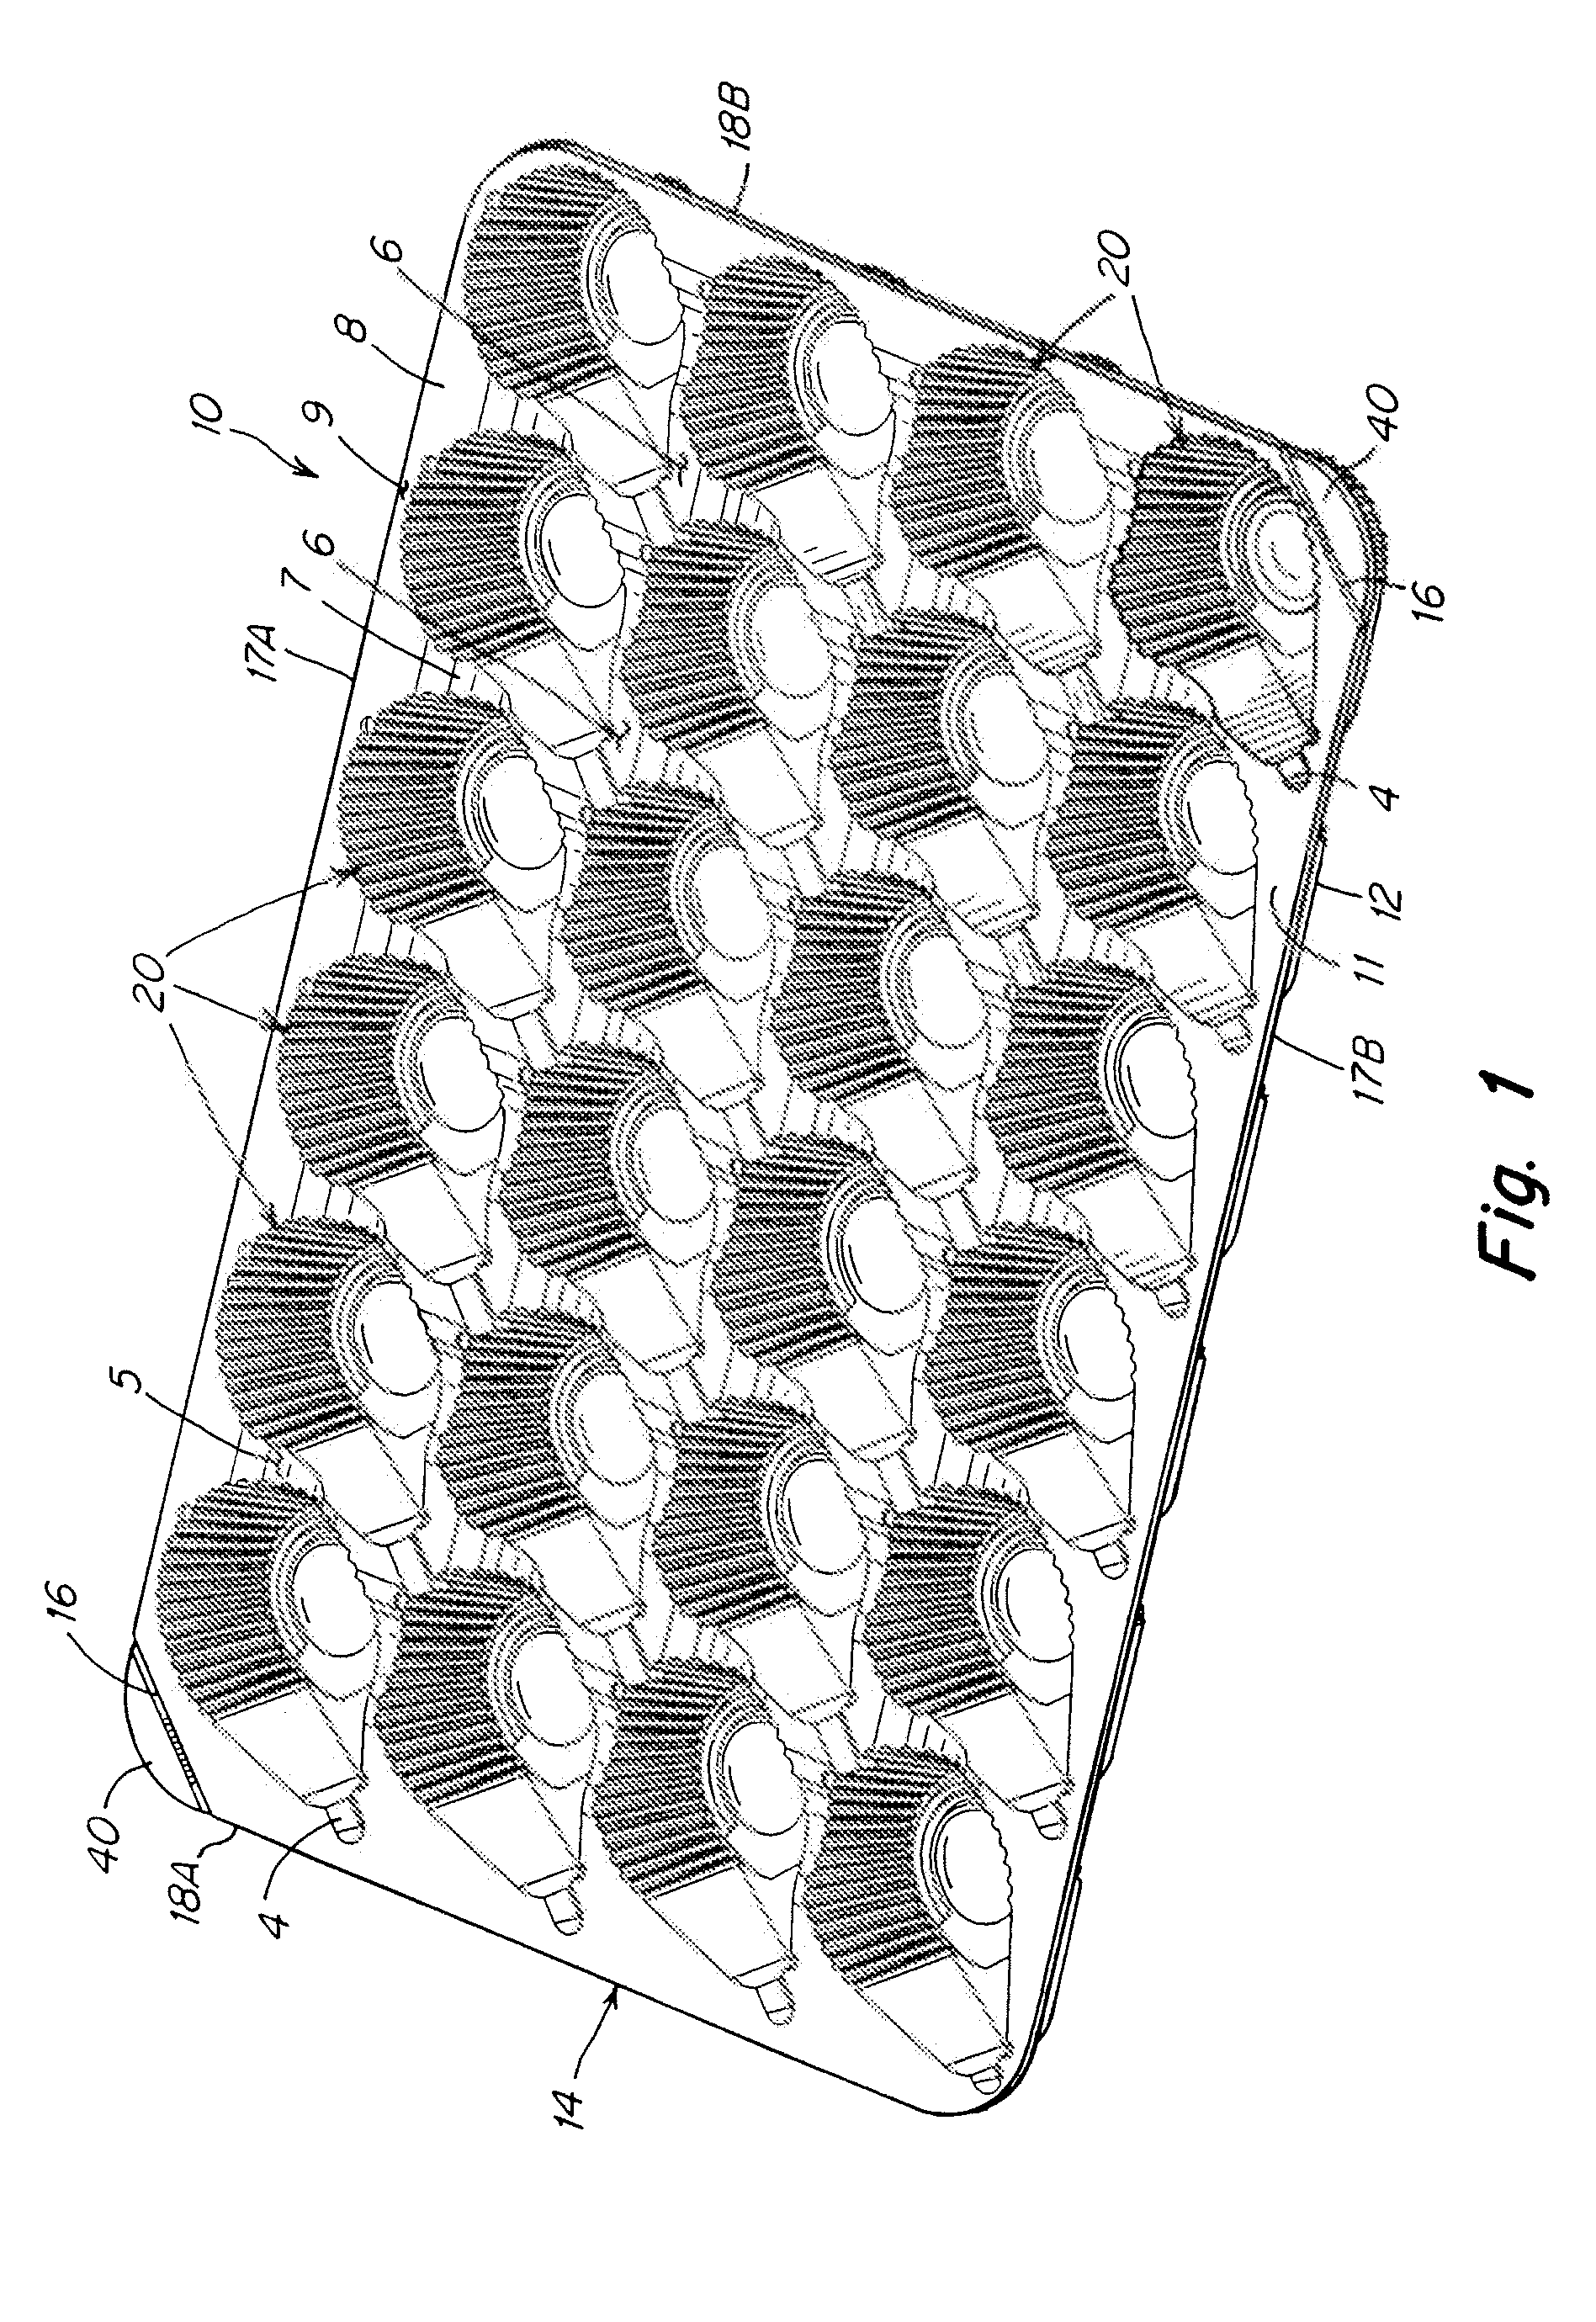 Packing tray having cell pockets with expandable sidewalls and floating base, and method of manufacture